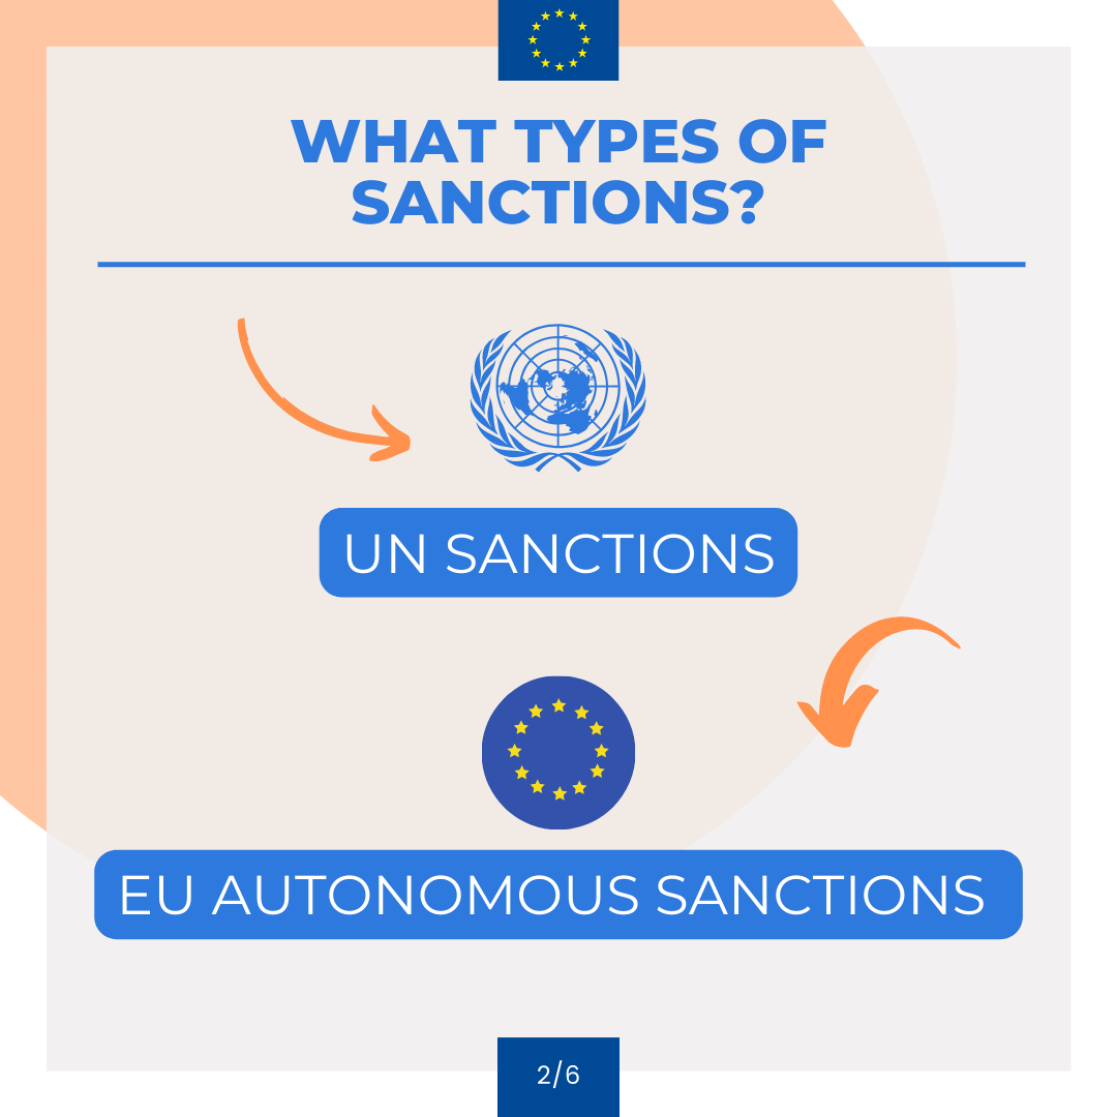 What types of sanctions?